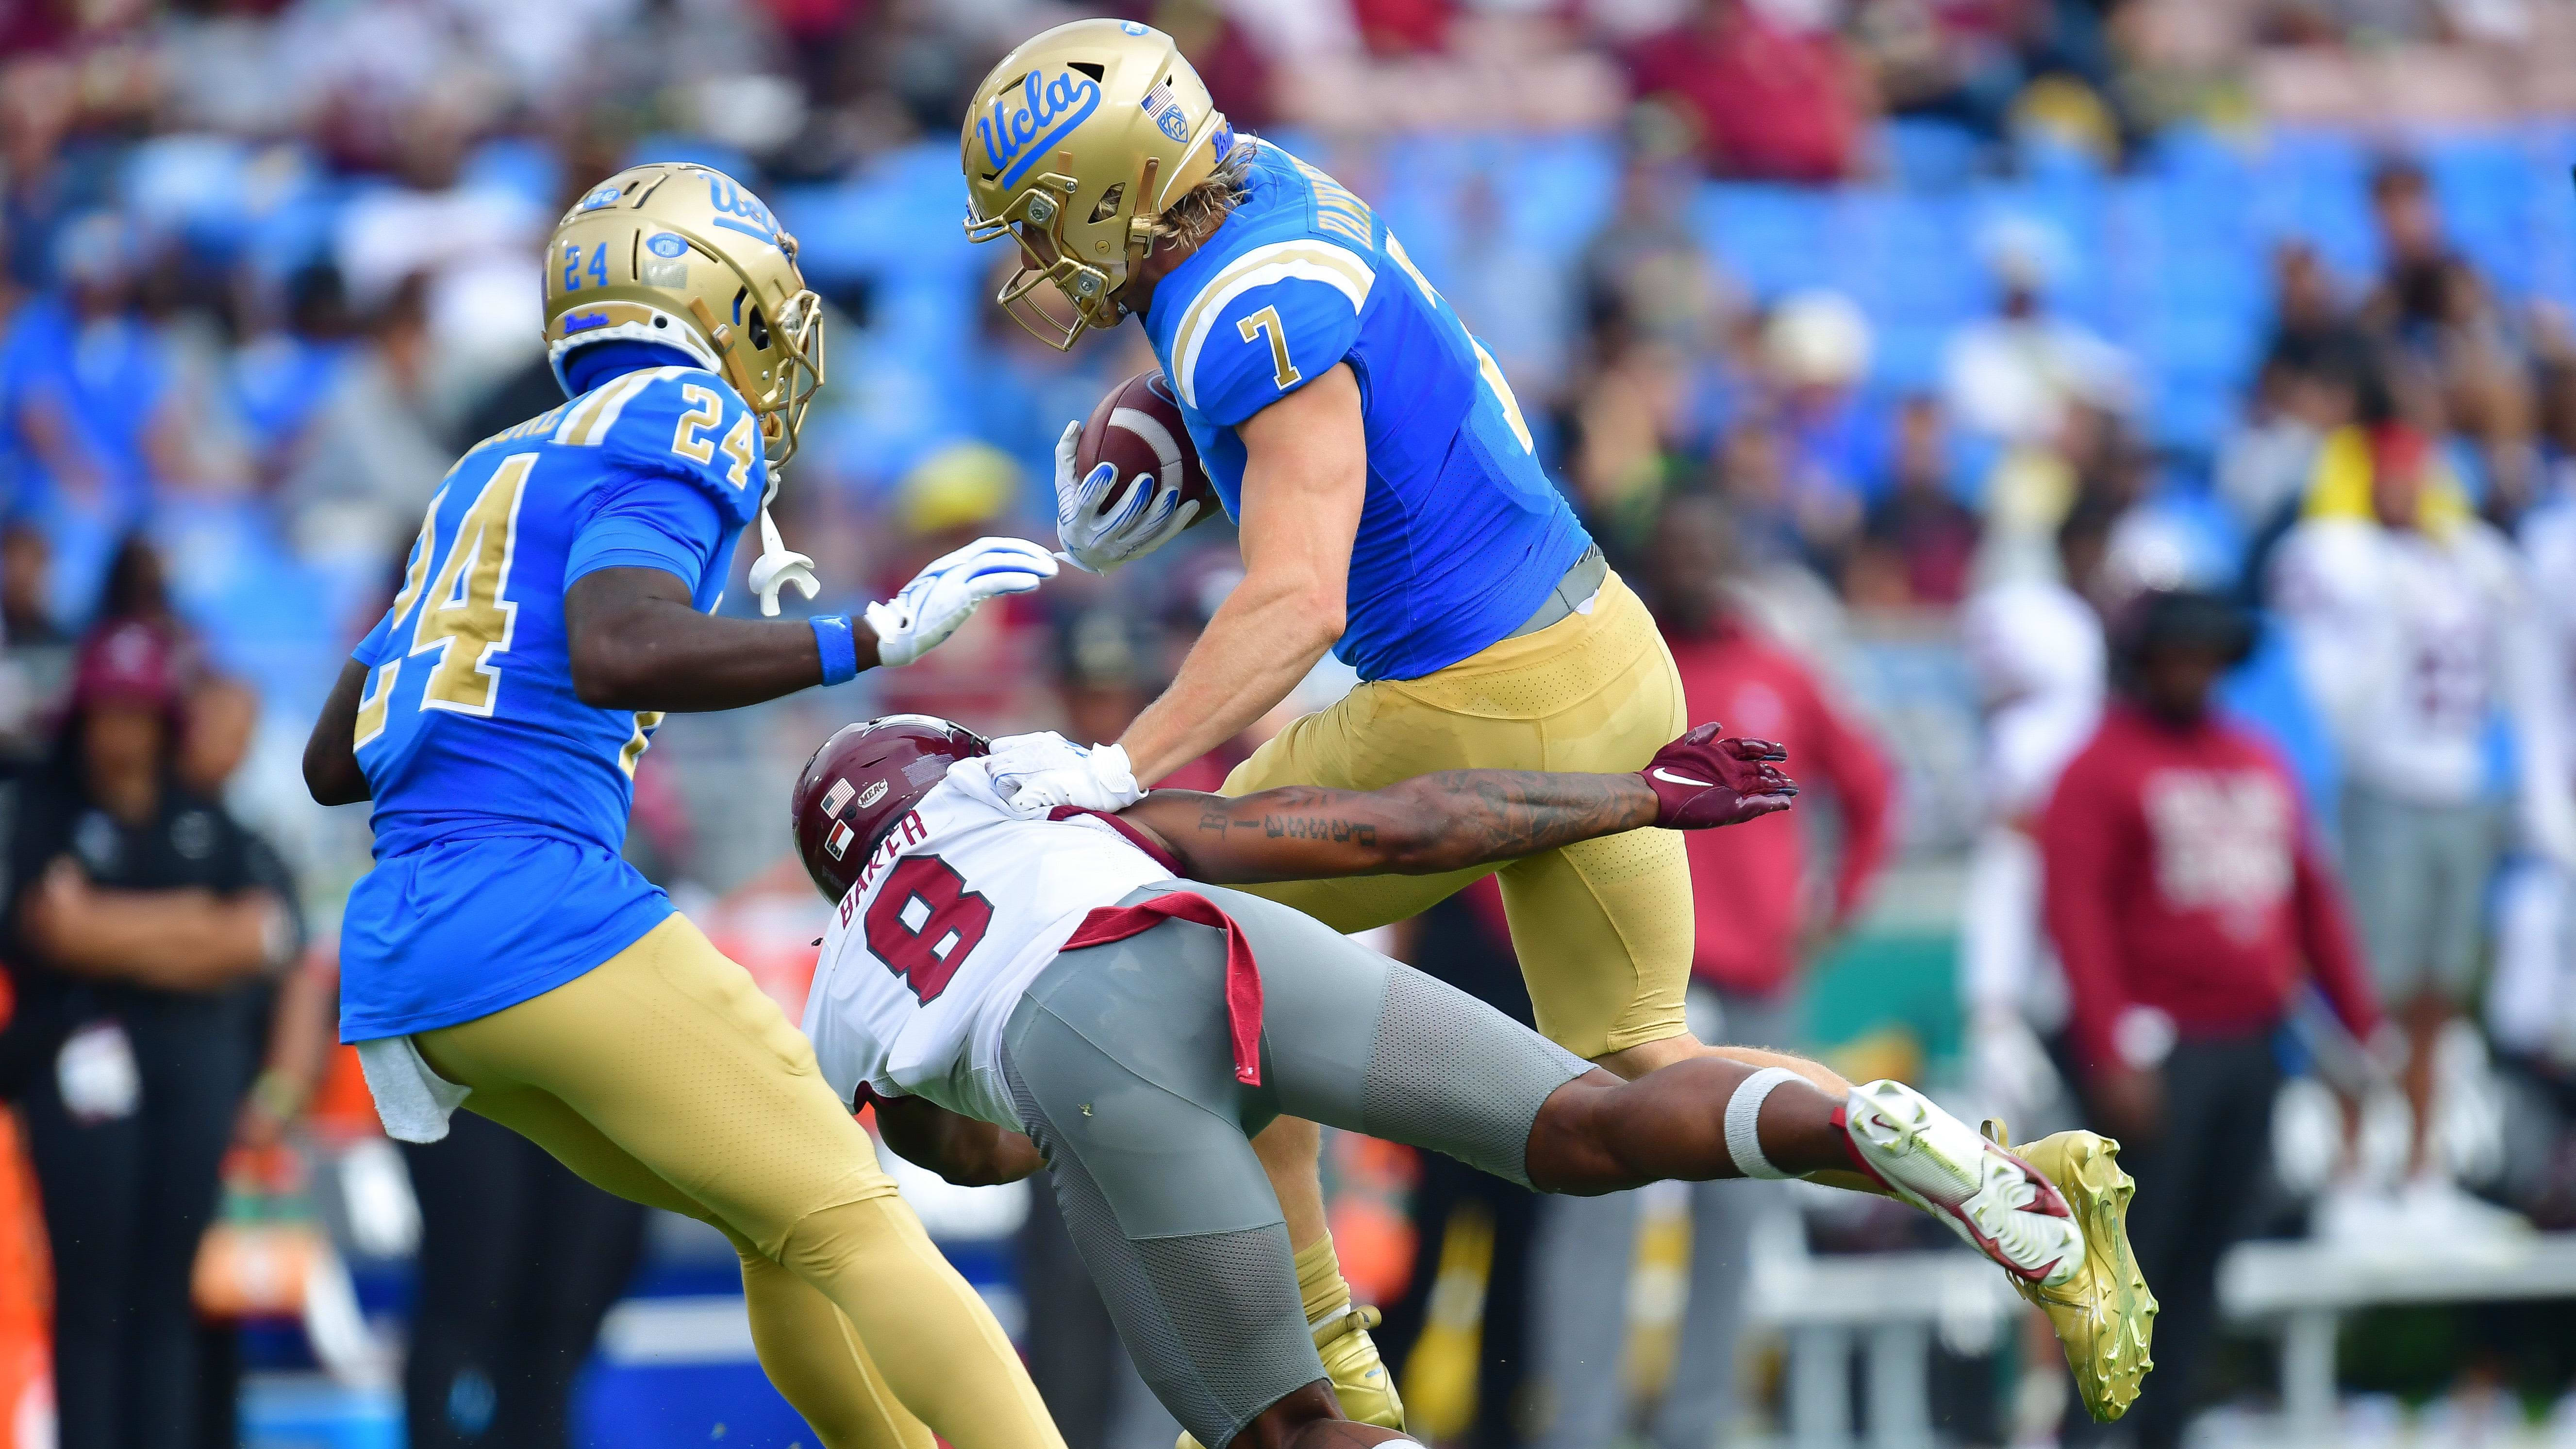 UCLA Football: NFC East Club Signs Undrafted Former Bruins Back